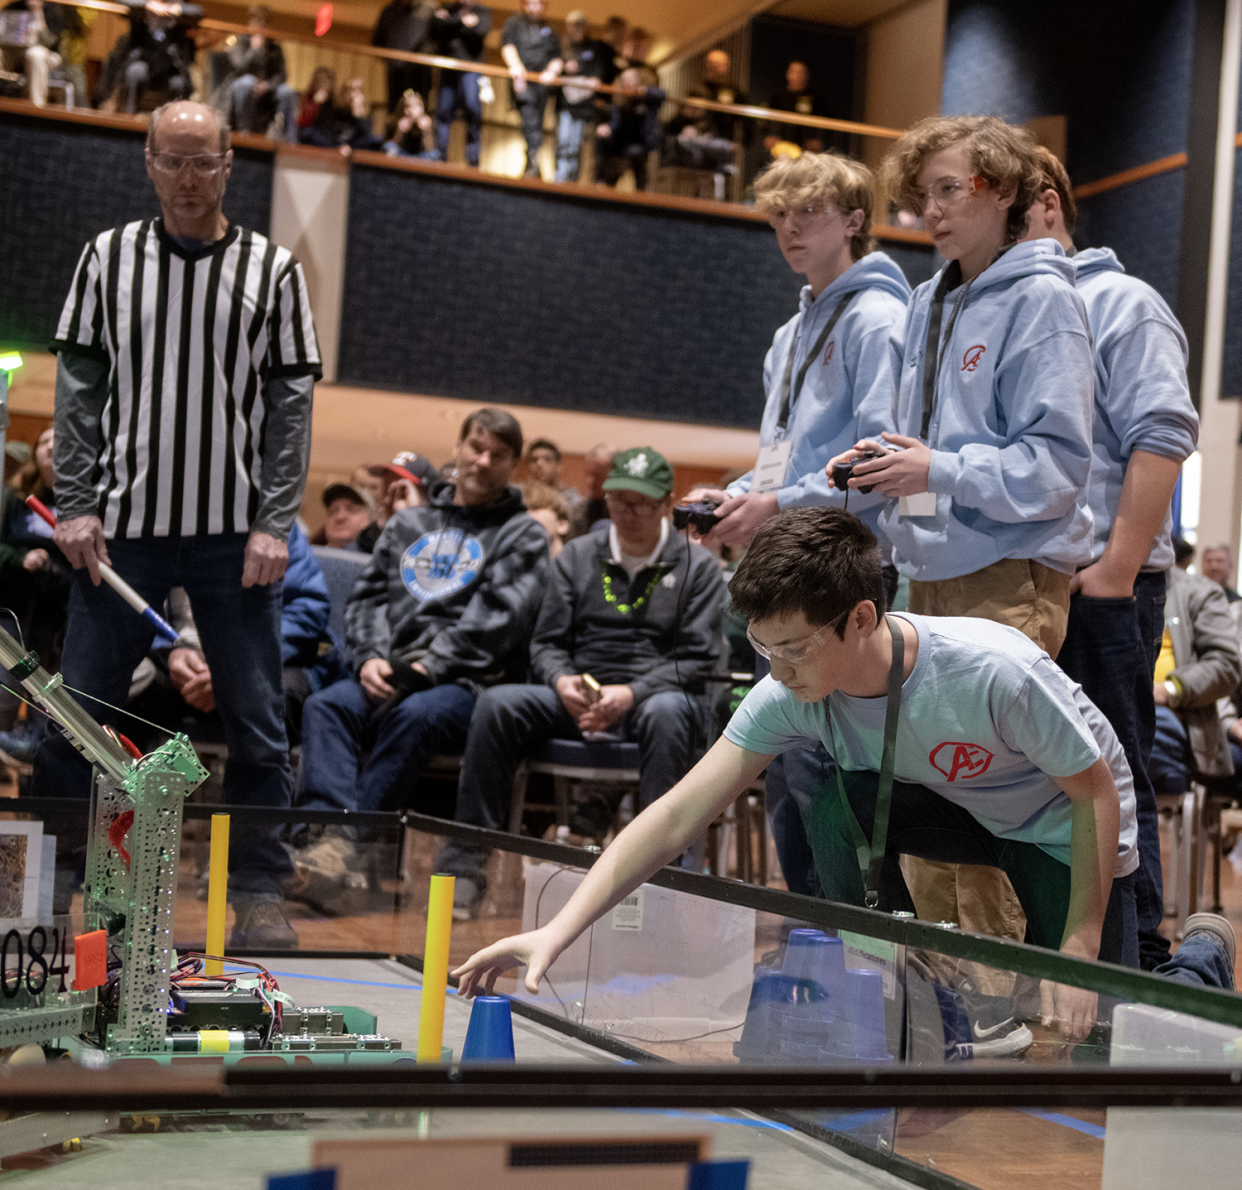 Noah Chaney, 14, and his team, Aedificatores — Owen Crawley, 14, Blake Simpkins, 14, and Maddex Fildes, 14, all of Kent — compete in the qualification round.